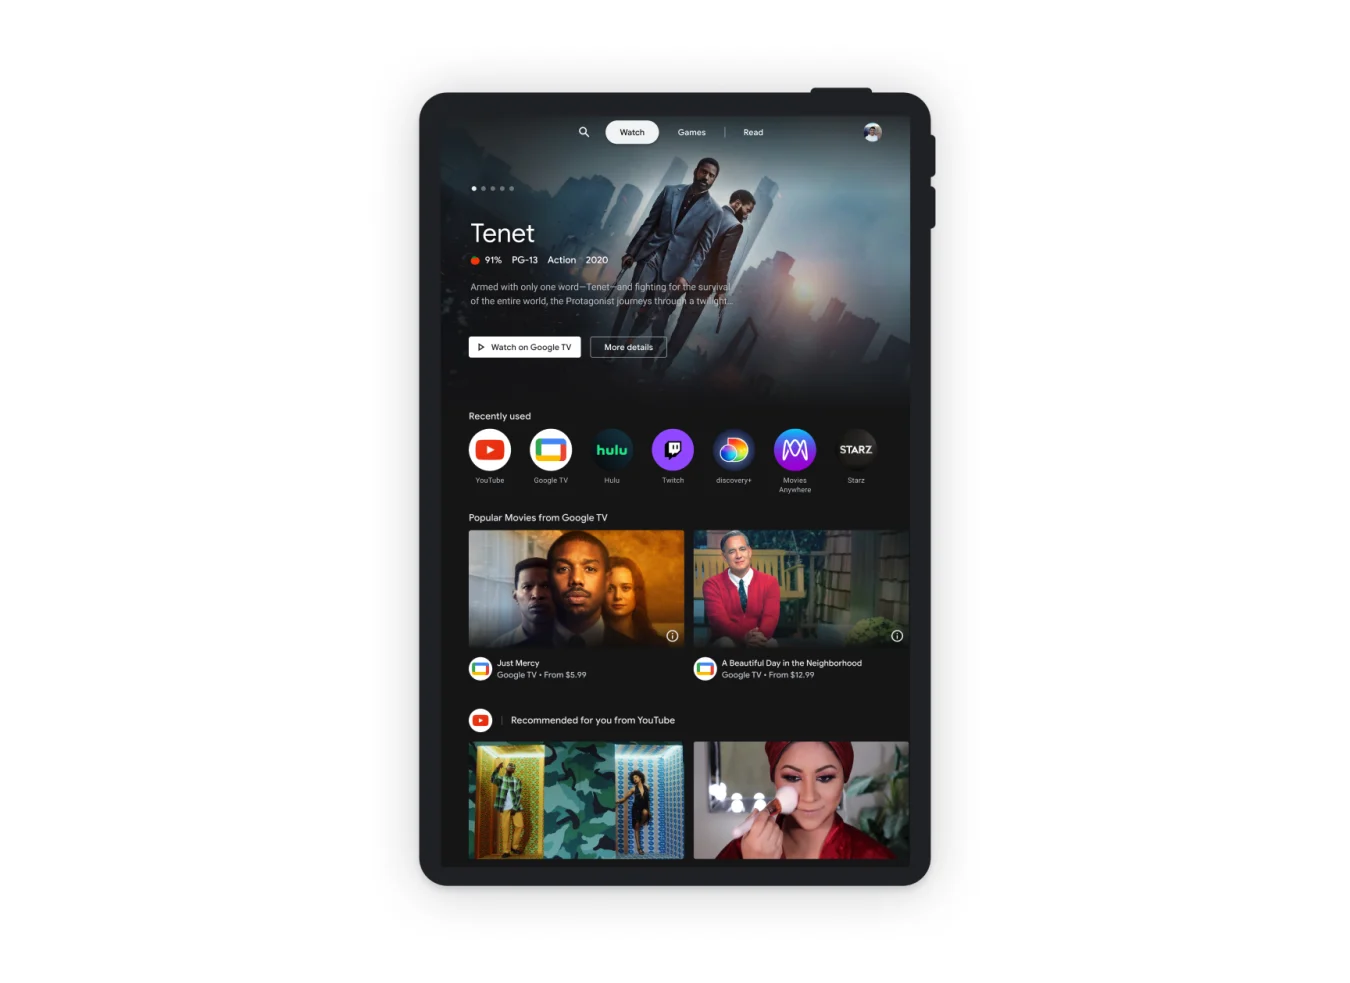 Google Entertainment Space for Android tablets. A tablet in portrait orientation showing the Watch tab in the new Entertainment Space. The top third is taken up by a recommendation for the movie Tenet, and below it is a small row of Recently Used apps. The rest of the screen shows taller rows of shows and the first is labelled 